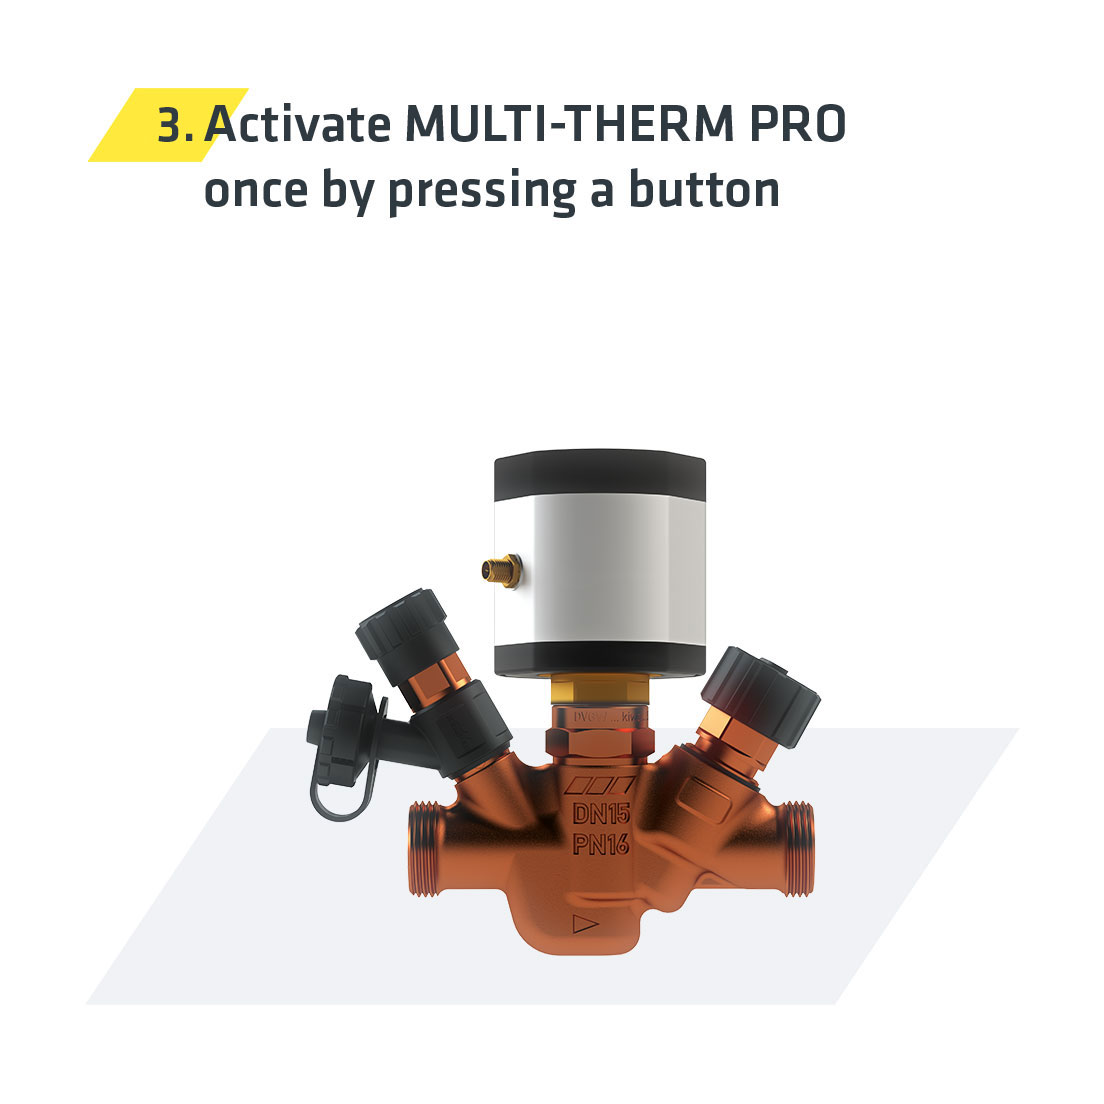 Upgrade Multi-Therm-Pro – Activate the Multi-Therm-Pro once by pressing a button | Kemper Group